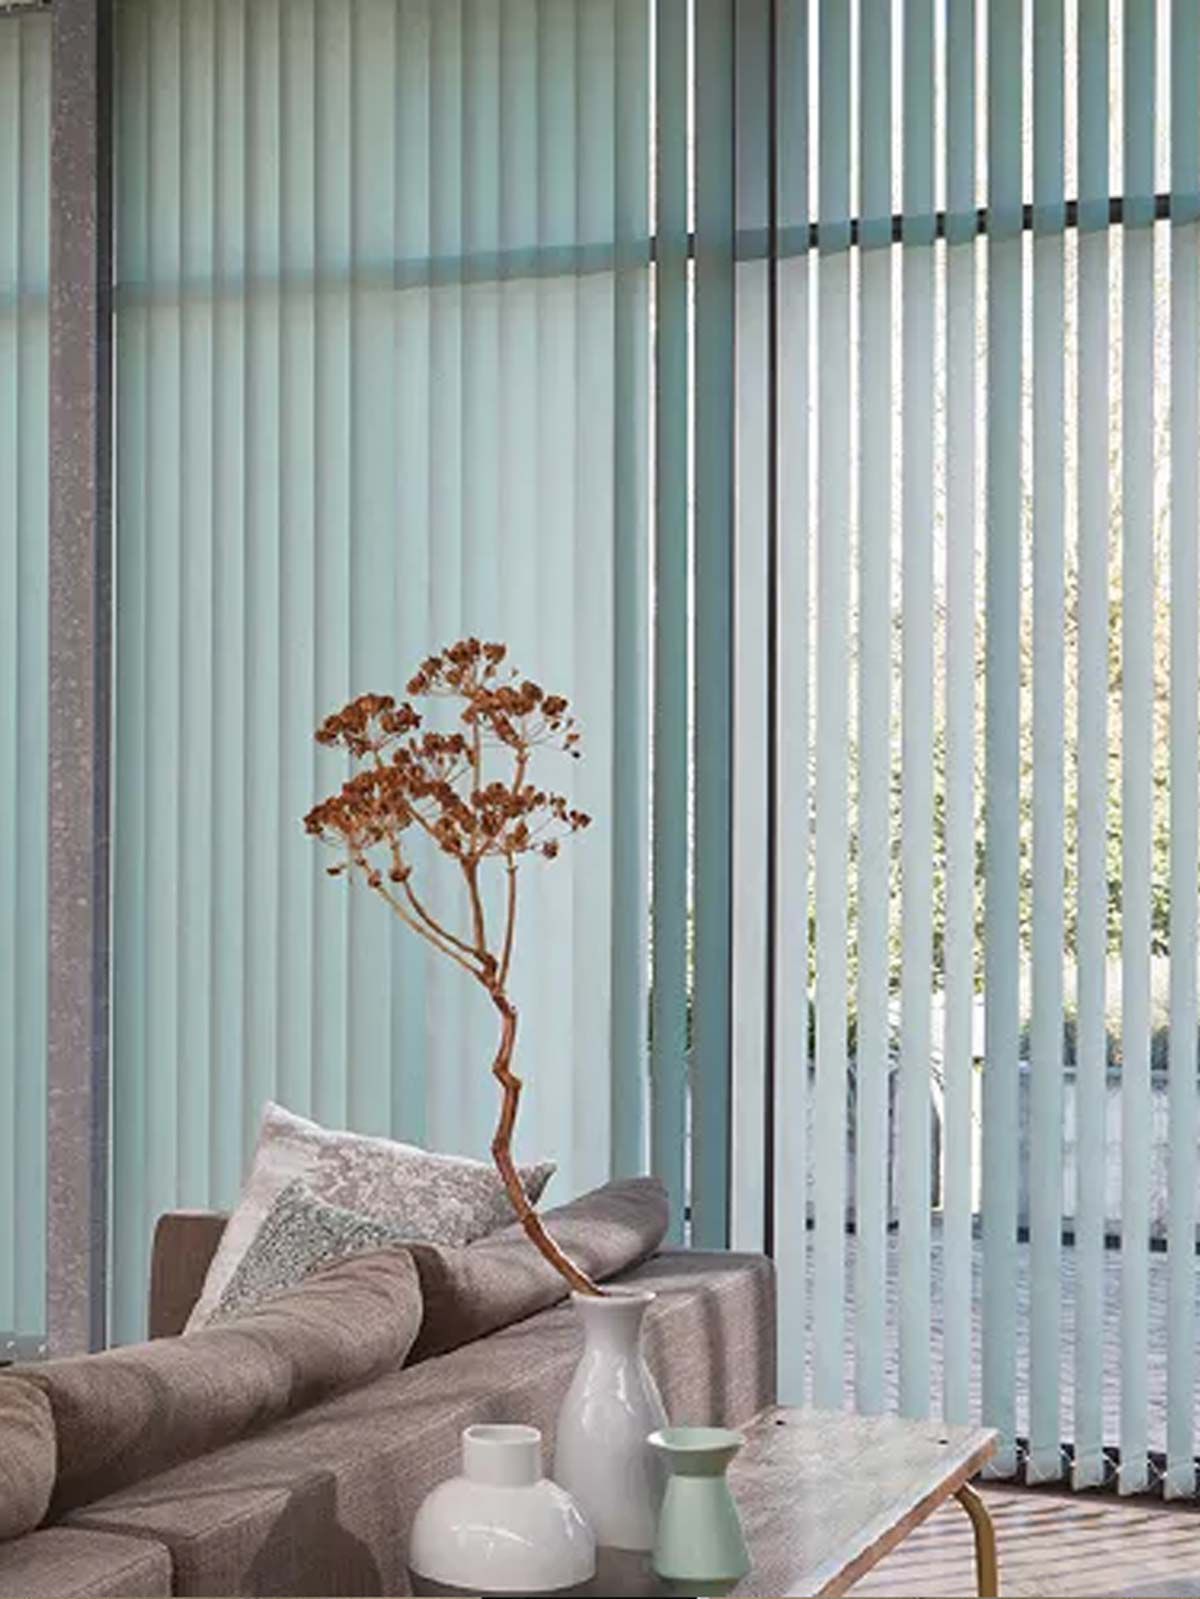 Vertical blind solutions available from John Lewis